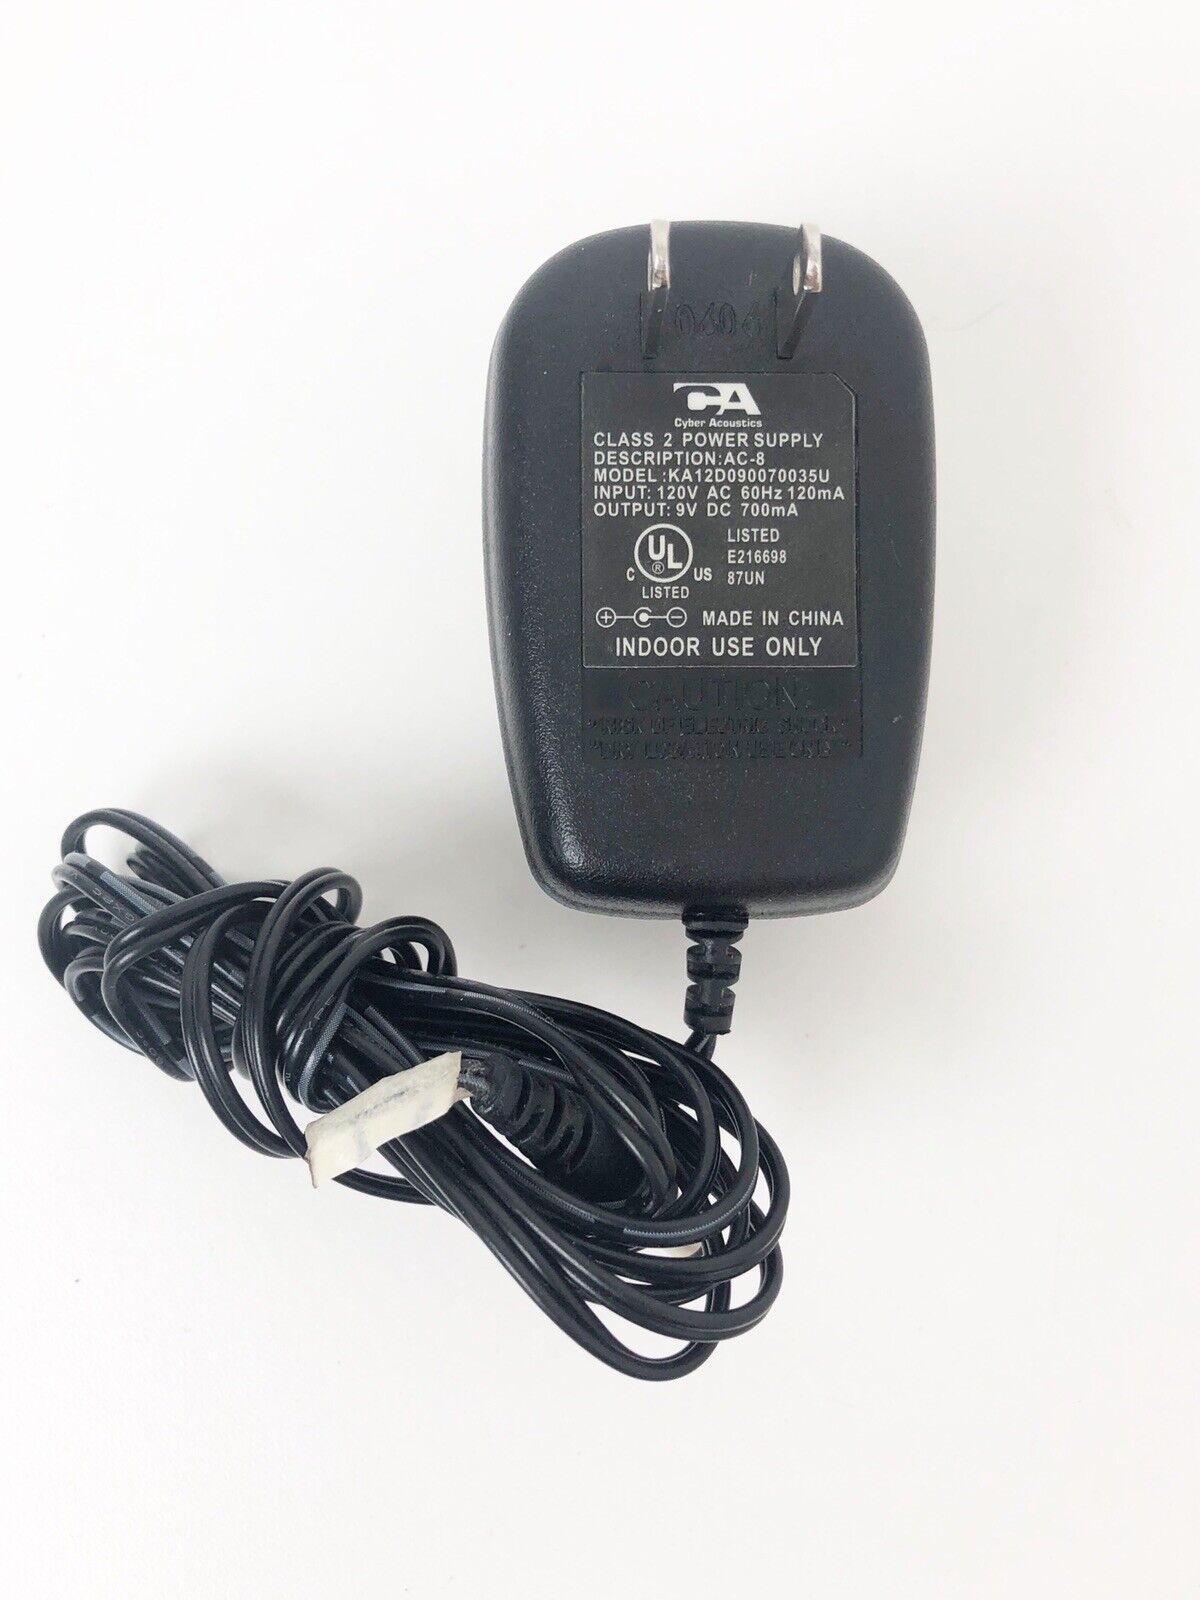 *Brand NEW*Cyber Acoustics KA12D090070035u Charger 9 Volts 700mA AC Adapter Power Supply